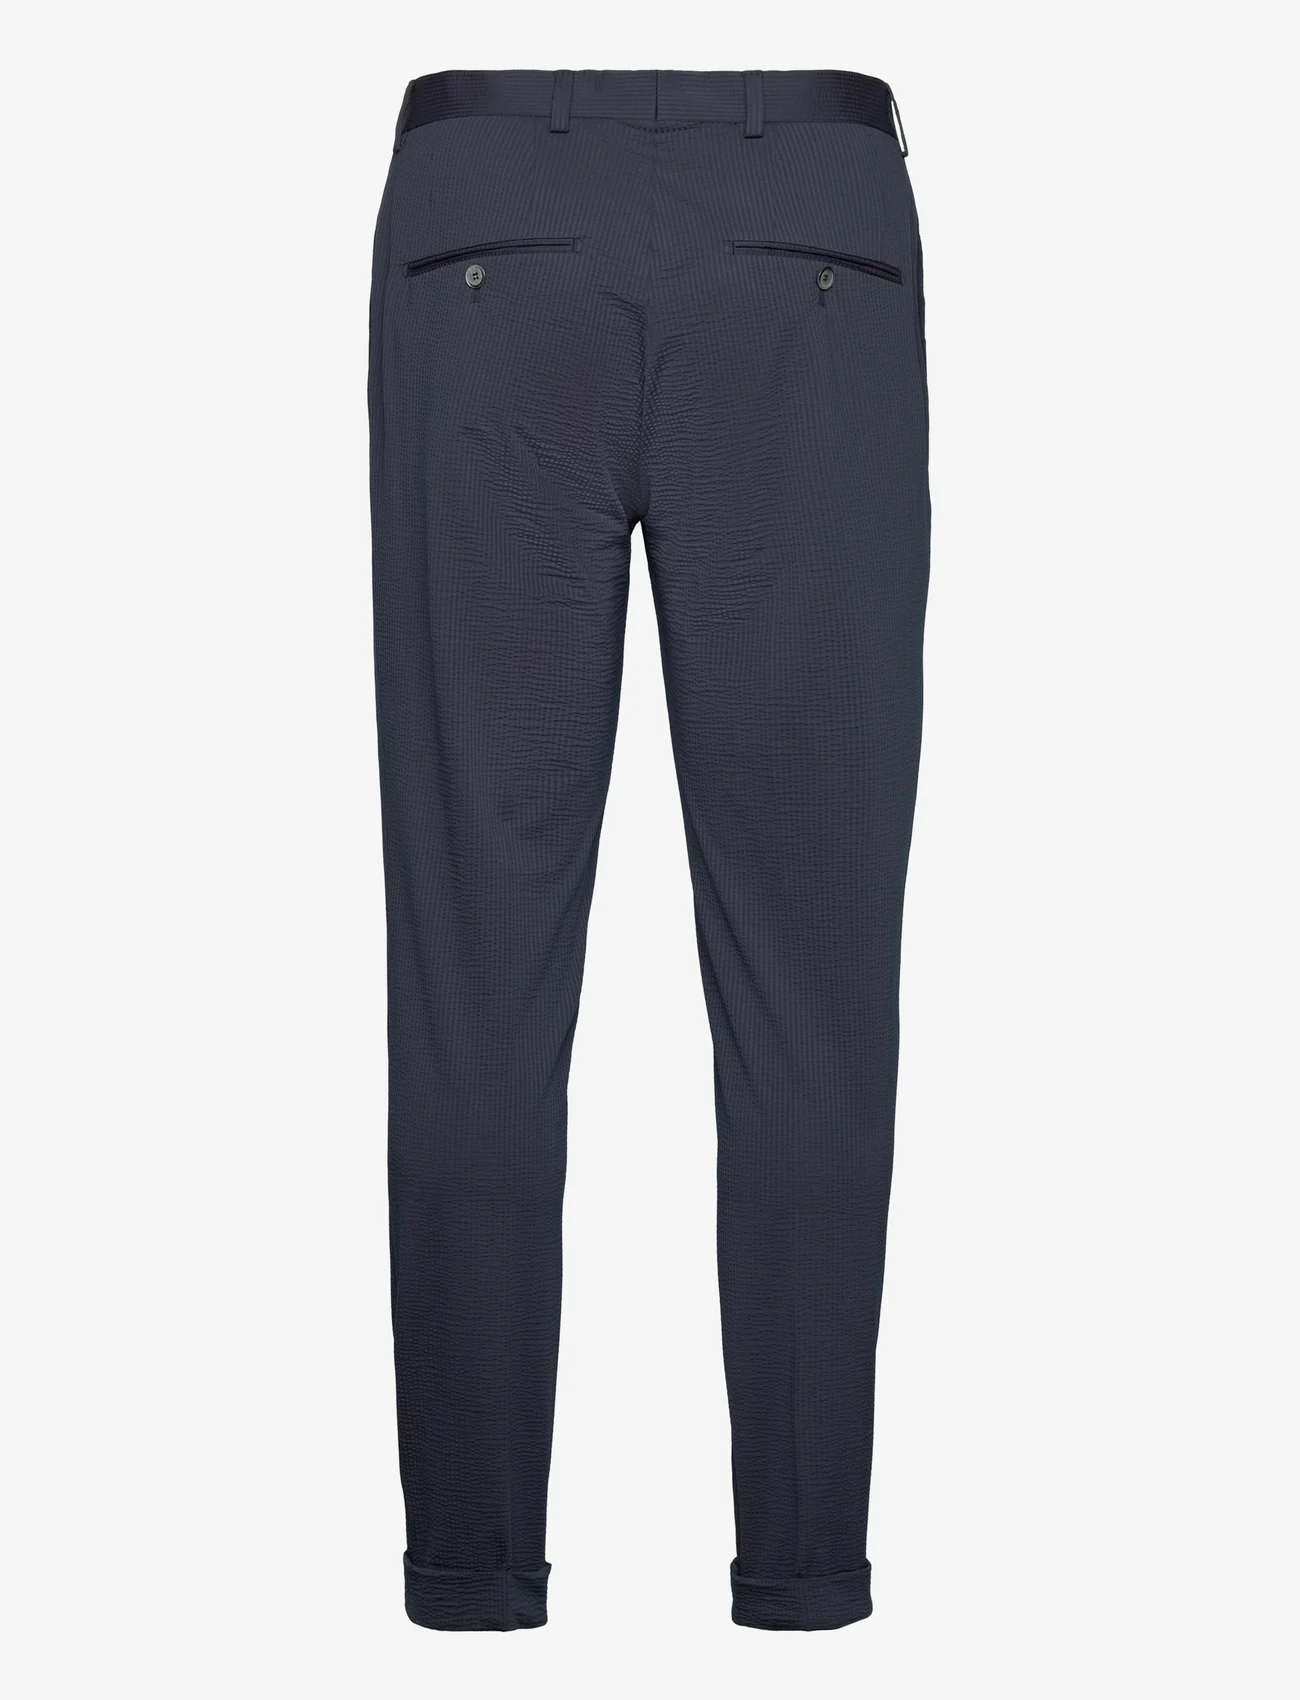 SIR of Sweden - Alex Trousers - linen trousers - navy - 1